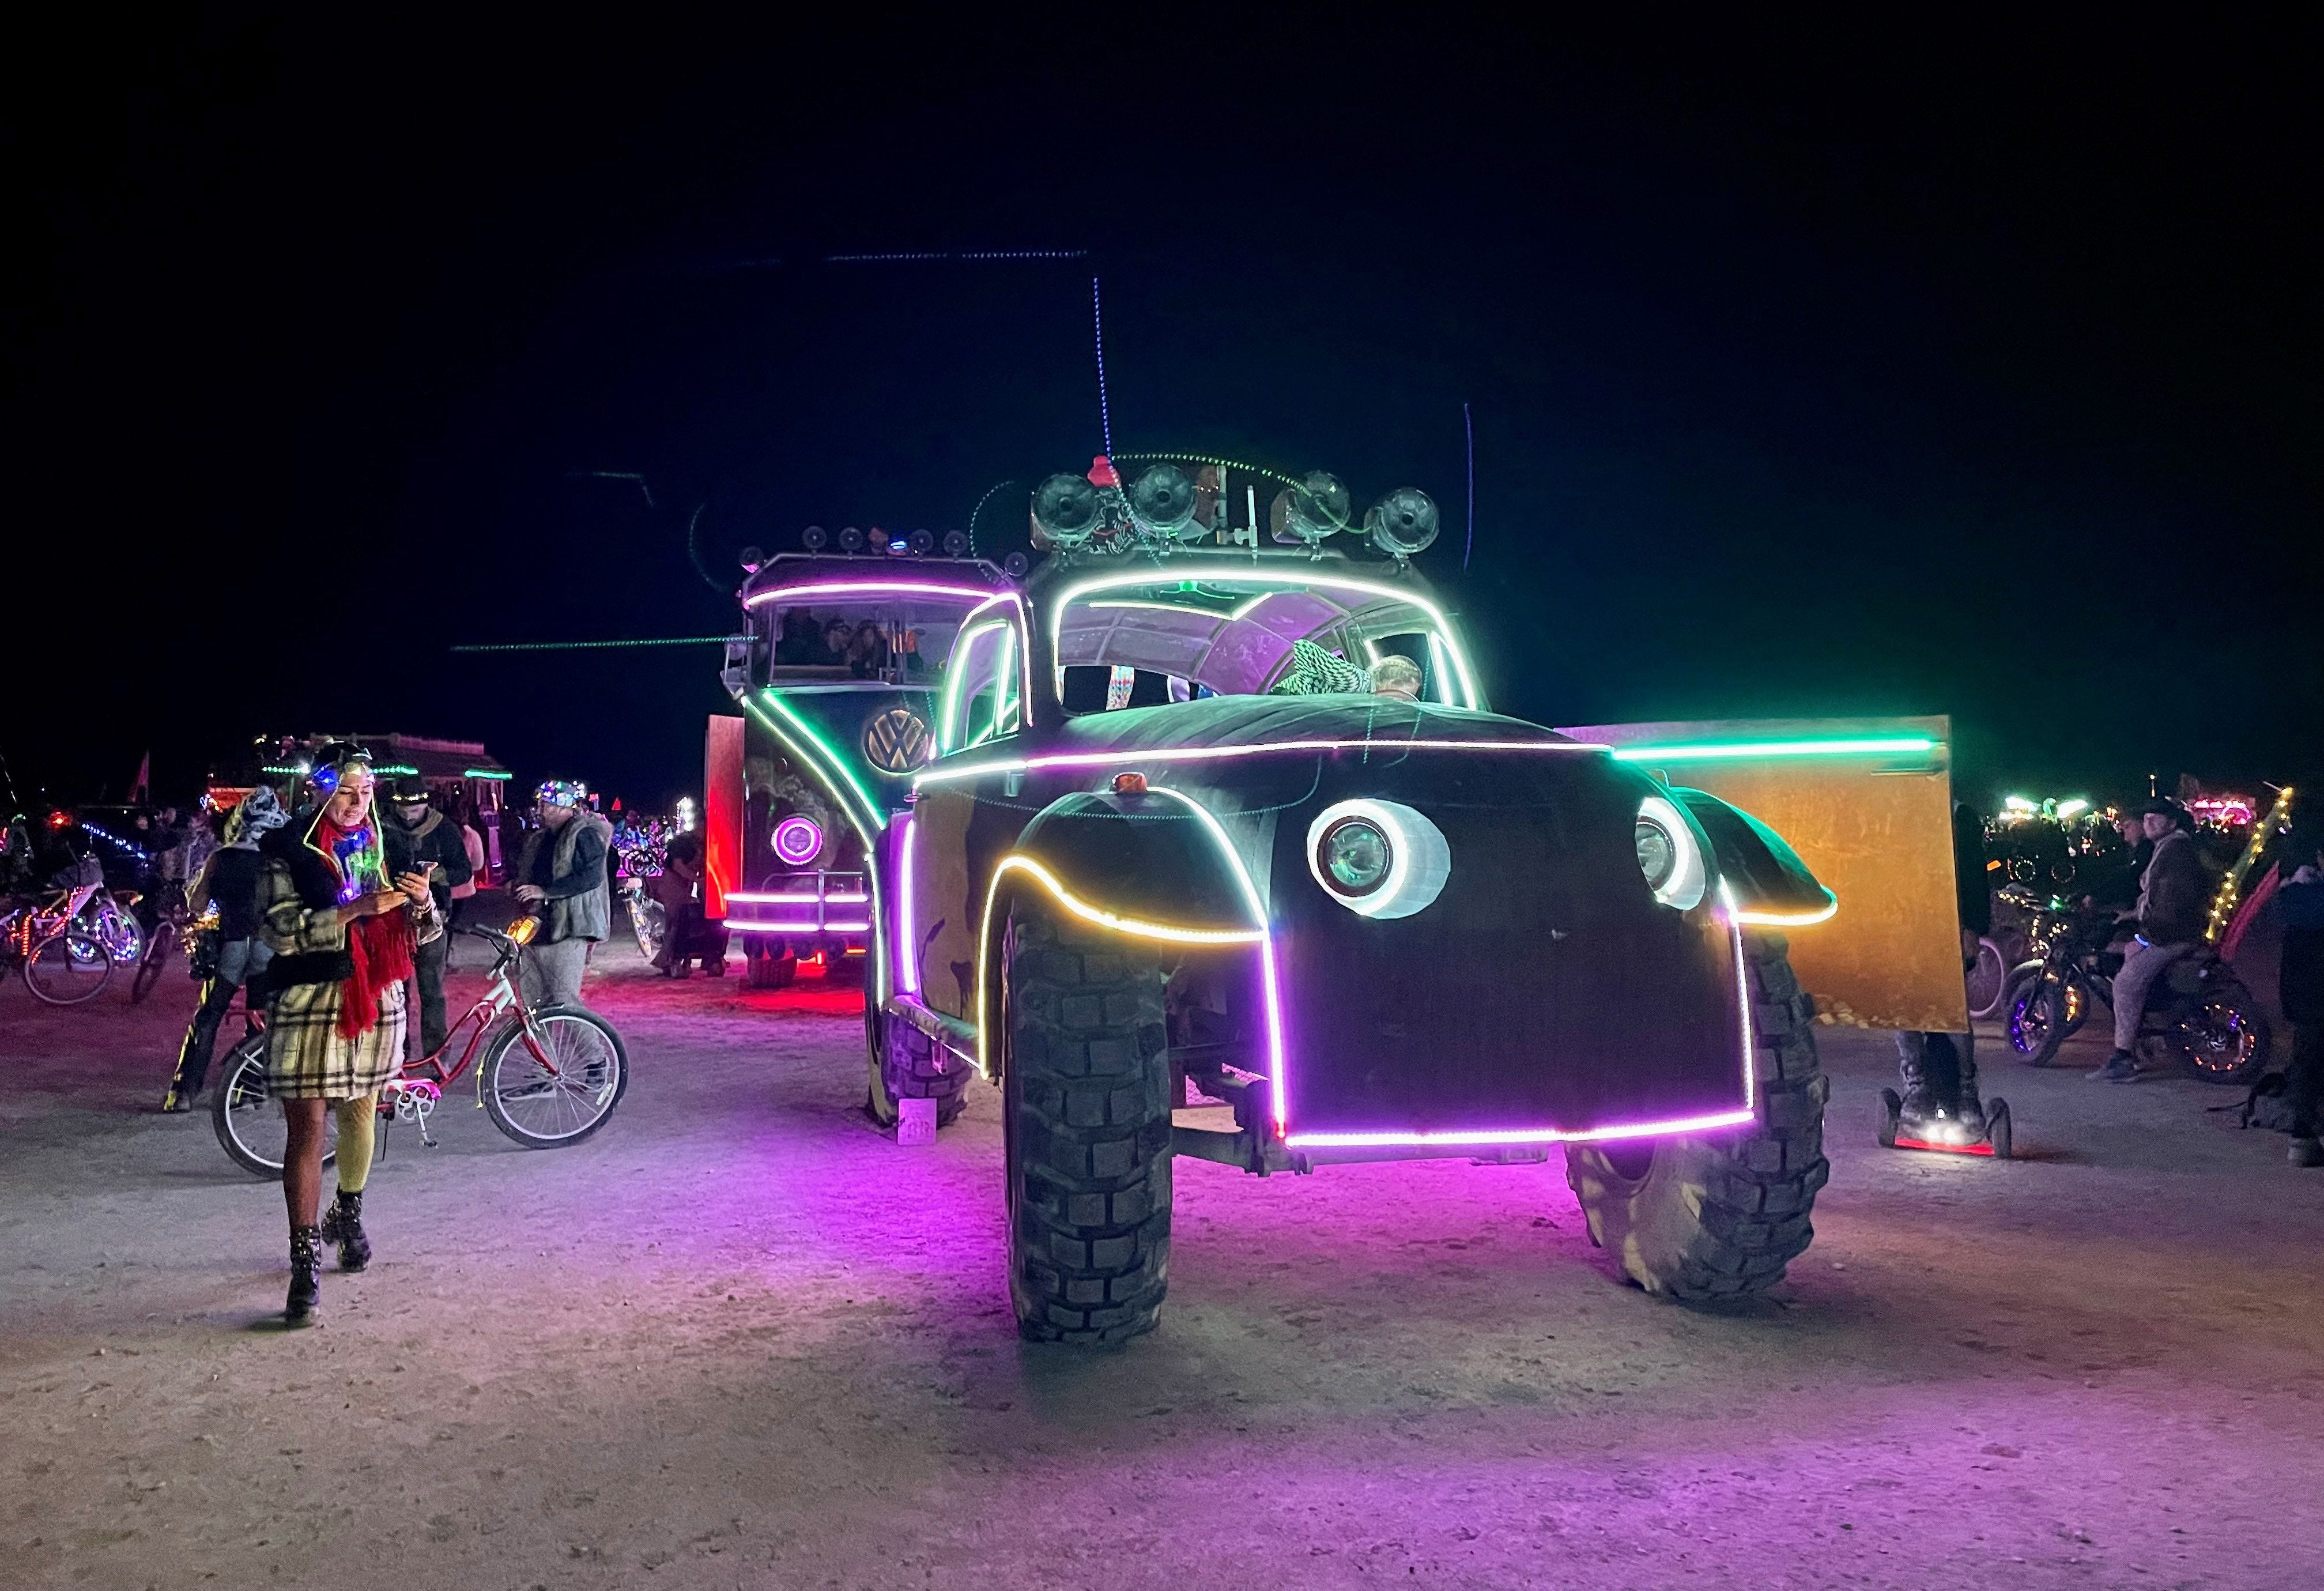 <p>On its face, <a href="https://www.businessinsider.com/tech-ceos-founders-attended-burning-man">Burning Man</a> — the anticapitalist art and music festival in the Nevada desert — doesn't really seem like an event for billionaires. But the richest people in the world don't seem to care about whether or not they're wanted.</p><p>Since the 1990s, attending Burning Man has become a sort of status symbol of the tech elite. Google founders Sergey Brin and Larry Page are longtime Burners — the festival inspired the very first Google Doodle — as is Eric Schmidt, who they chose to be Google's CEO.</p><p>Facebook cofounders Dustin Moskowitz and Mark Zuckerberg, and Uber cofounder Garrett Camp have also attended. Even Ray Dalio, the billionaire hedge fund manager, wanted to see what all the hype was about, sporting some psychedelic bell bottoms and joining the party in 2019.</p><p>The experiences of many celebrities and <a href="https://www.businessinsider.com/burning-man-one-percent-ultra-wealthy-private-jet-personal-chef-2019-8#wealthy-guests-get-around-in-tricked-out-golf-carts-and-cars-called-art-cars-5">billionaires on the Playa</a> lean less into the "decommodification" and "leave no trace" principles of the festival and more into the "immediacy" one — as in instant gratification. They take charter planes into <a href="https://www.businessinsider.com/burning-man-private-black-rock-airport-flights-leave-no-trace-2023-9">Black Rock City's pop-up airport</a>, a temporary runway constructed for the occasion; travel around in tricked-out art cars (basically fancy golf carts); and forego rustic tents for more fancy camps, complete with furniture, air-conditioning, and personal chefs who charge six-figures for their services.</p><p>All of this may be why there was a hefty dose of schadenfreude when <a href="https://www.businessinsider.com/i-escaped-burning-man-mud-apocalypse-climate-change-2023-9">Burning Man went underwater</a>, quite literally.</p>